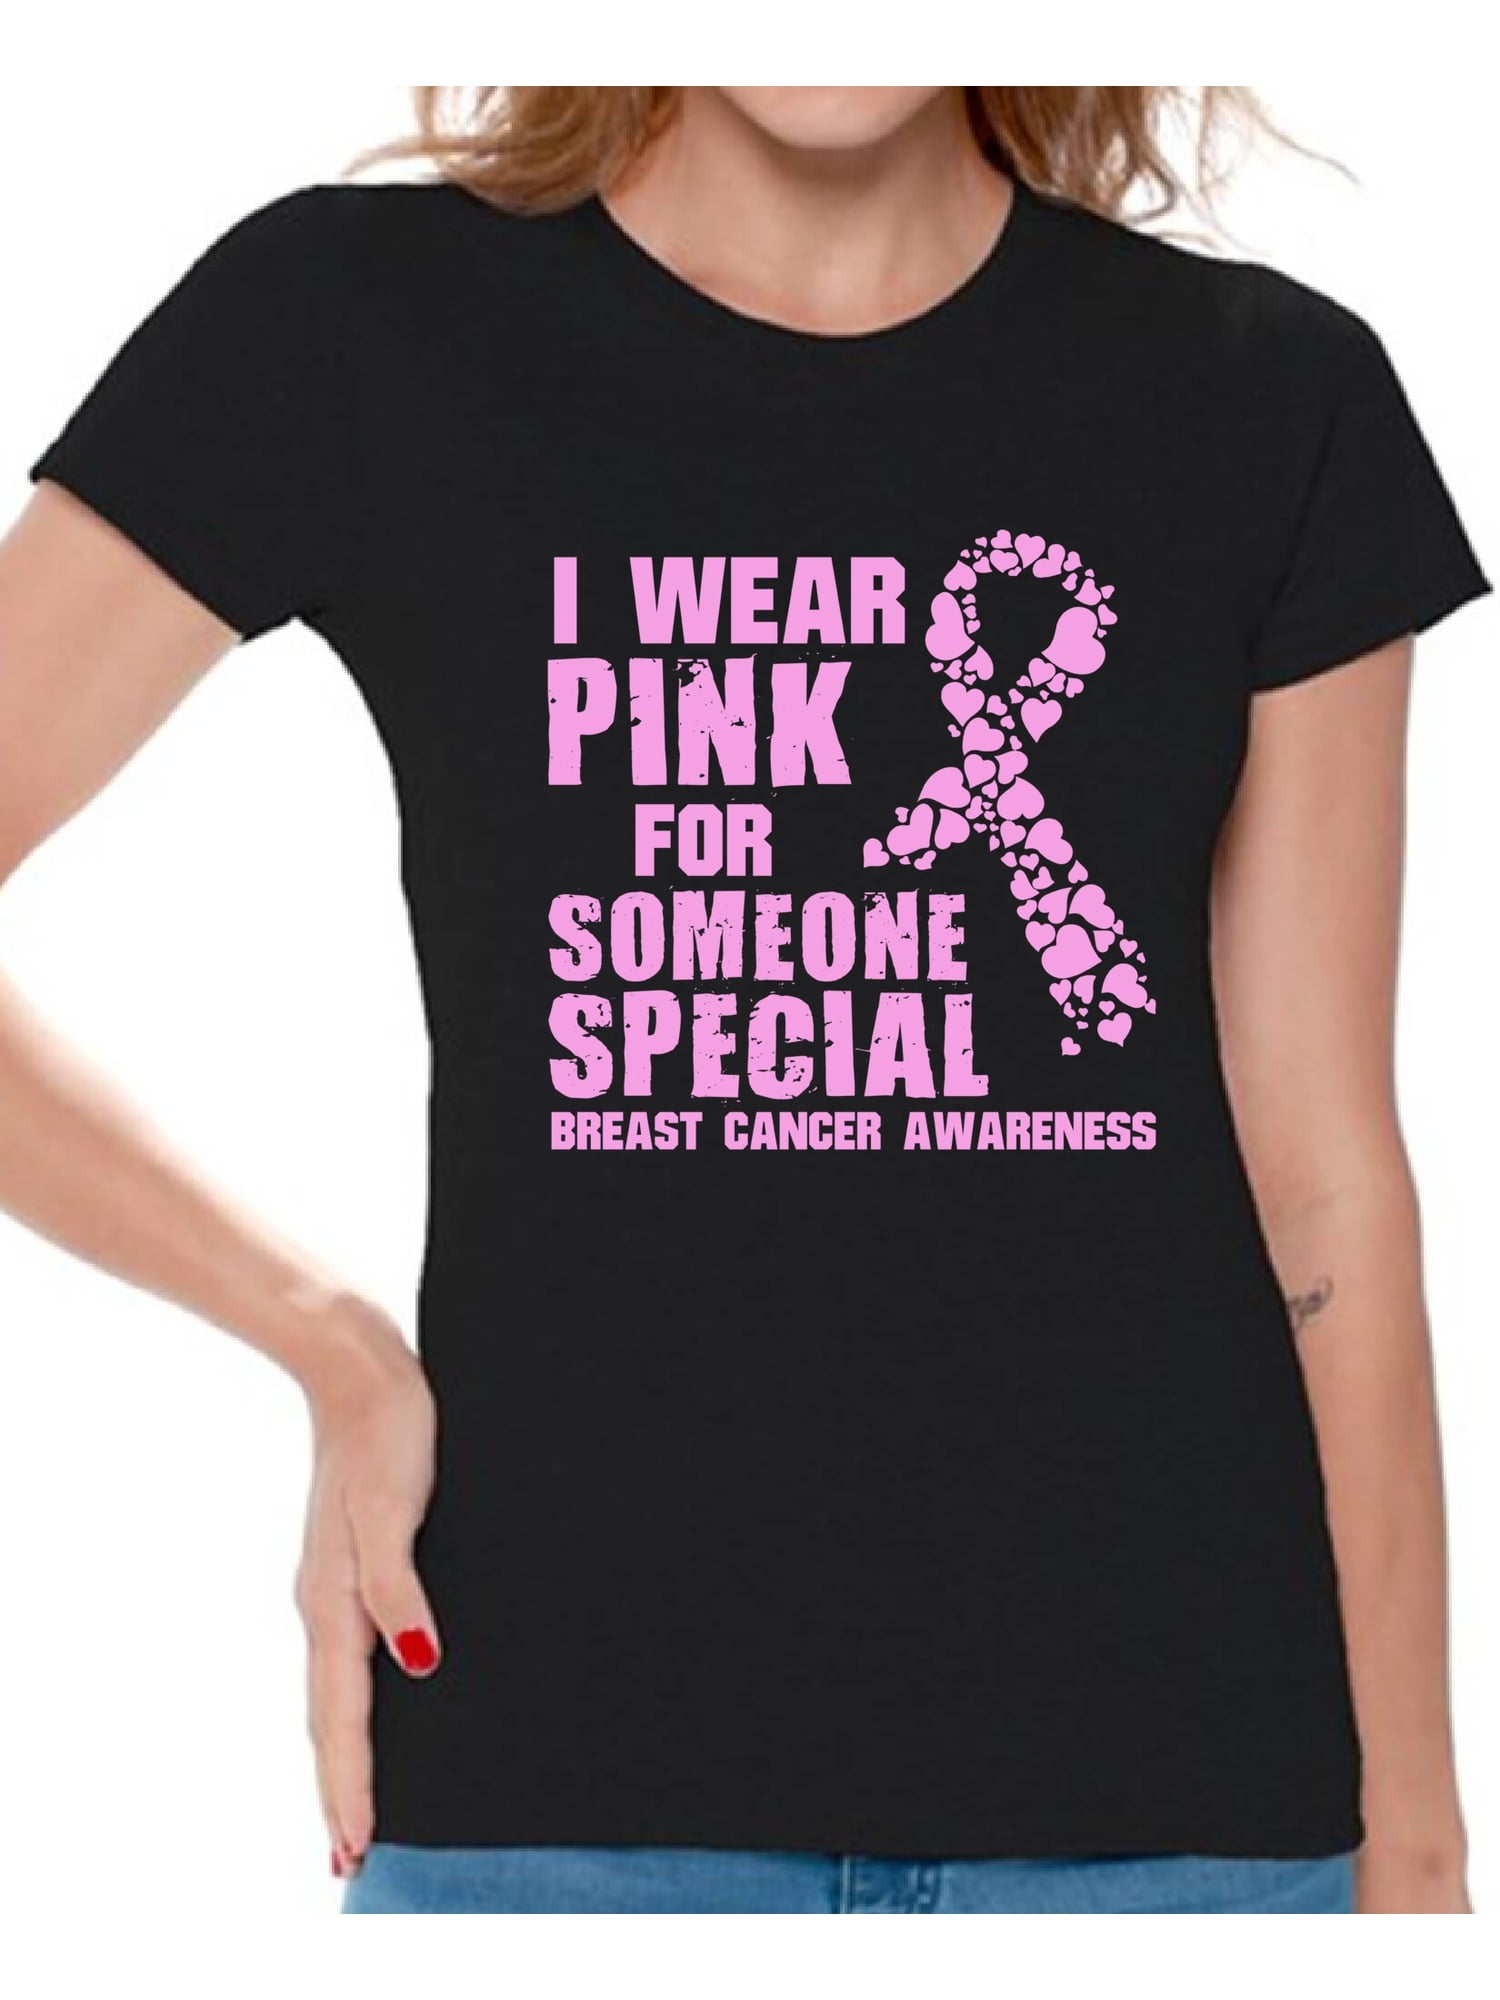 Someone Special Breast Cancer awareness T-shirt PINK Ribbon survivor support Tee 